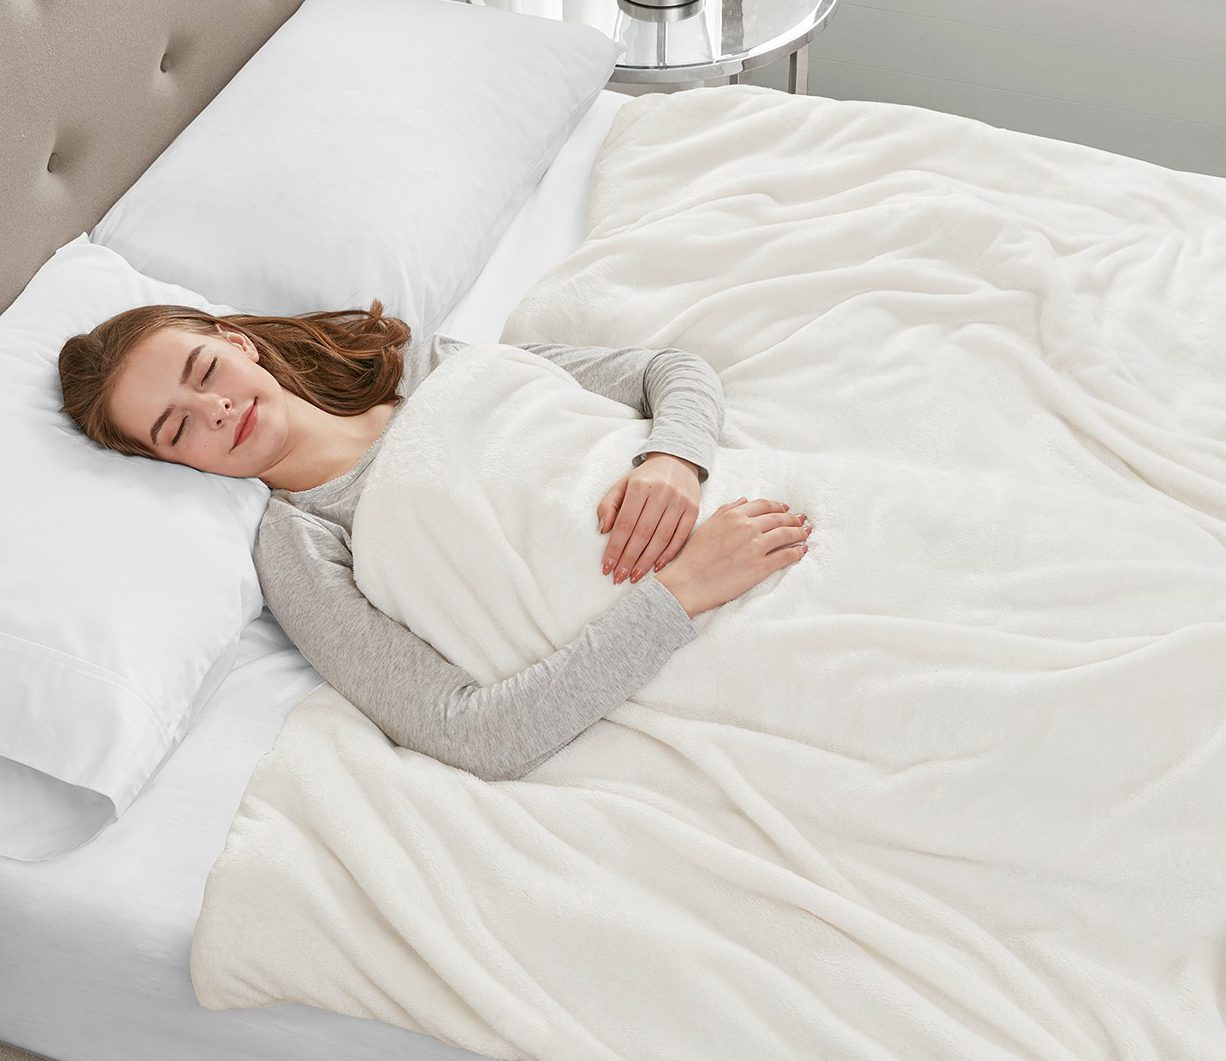 Weighted Plush Blanket $79.99 Shipped + Get $10 Kohls Cash (Reduces